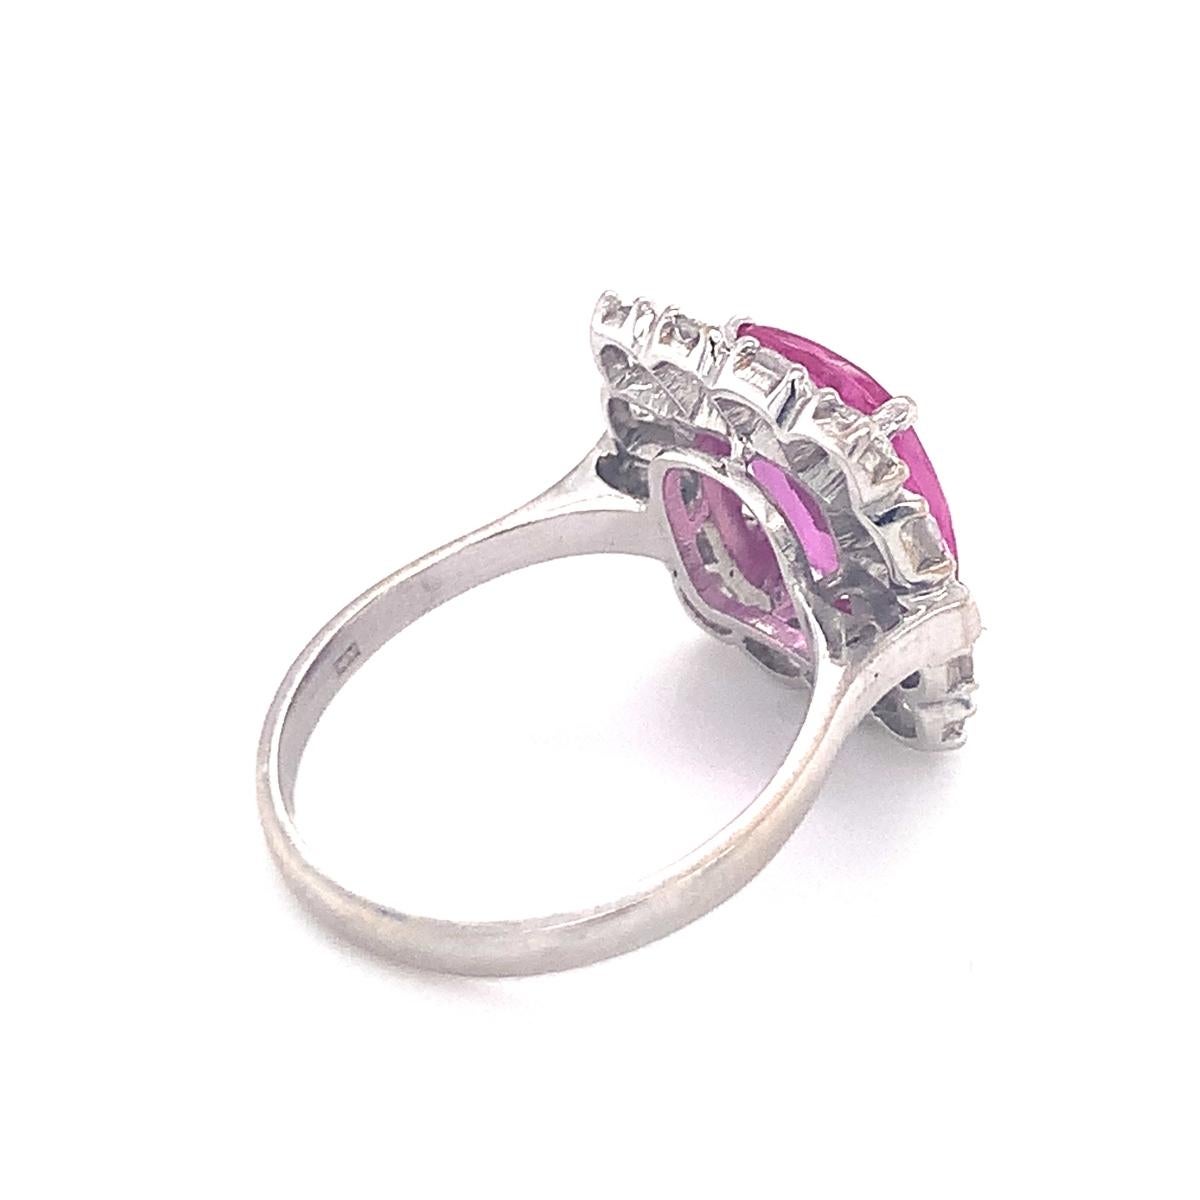 Gia Certified 4.10 Ct. Pink Sapphire and Diamond White Gold Ring, circa 1950s For Sale 1